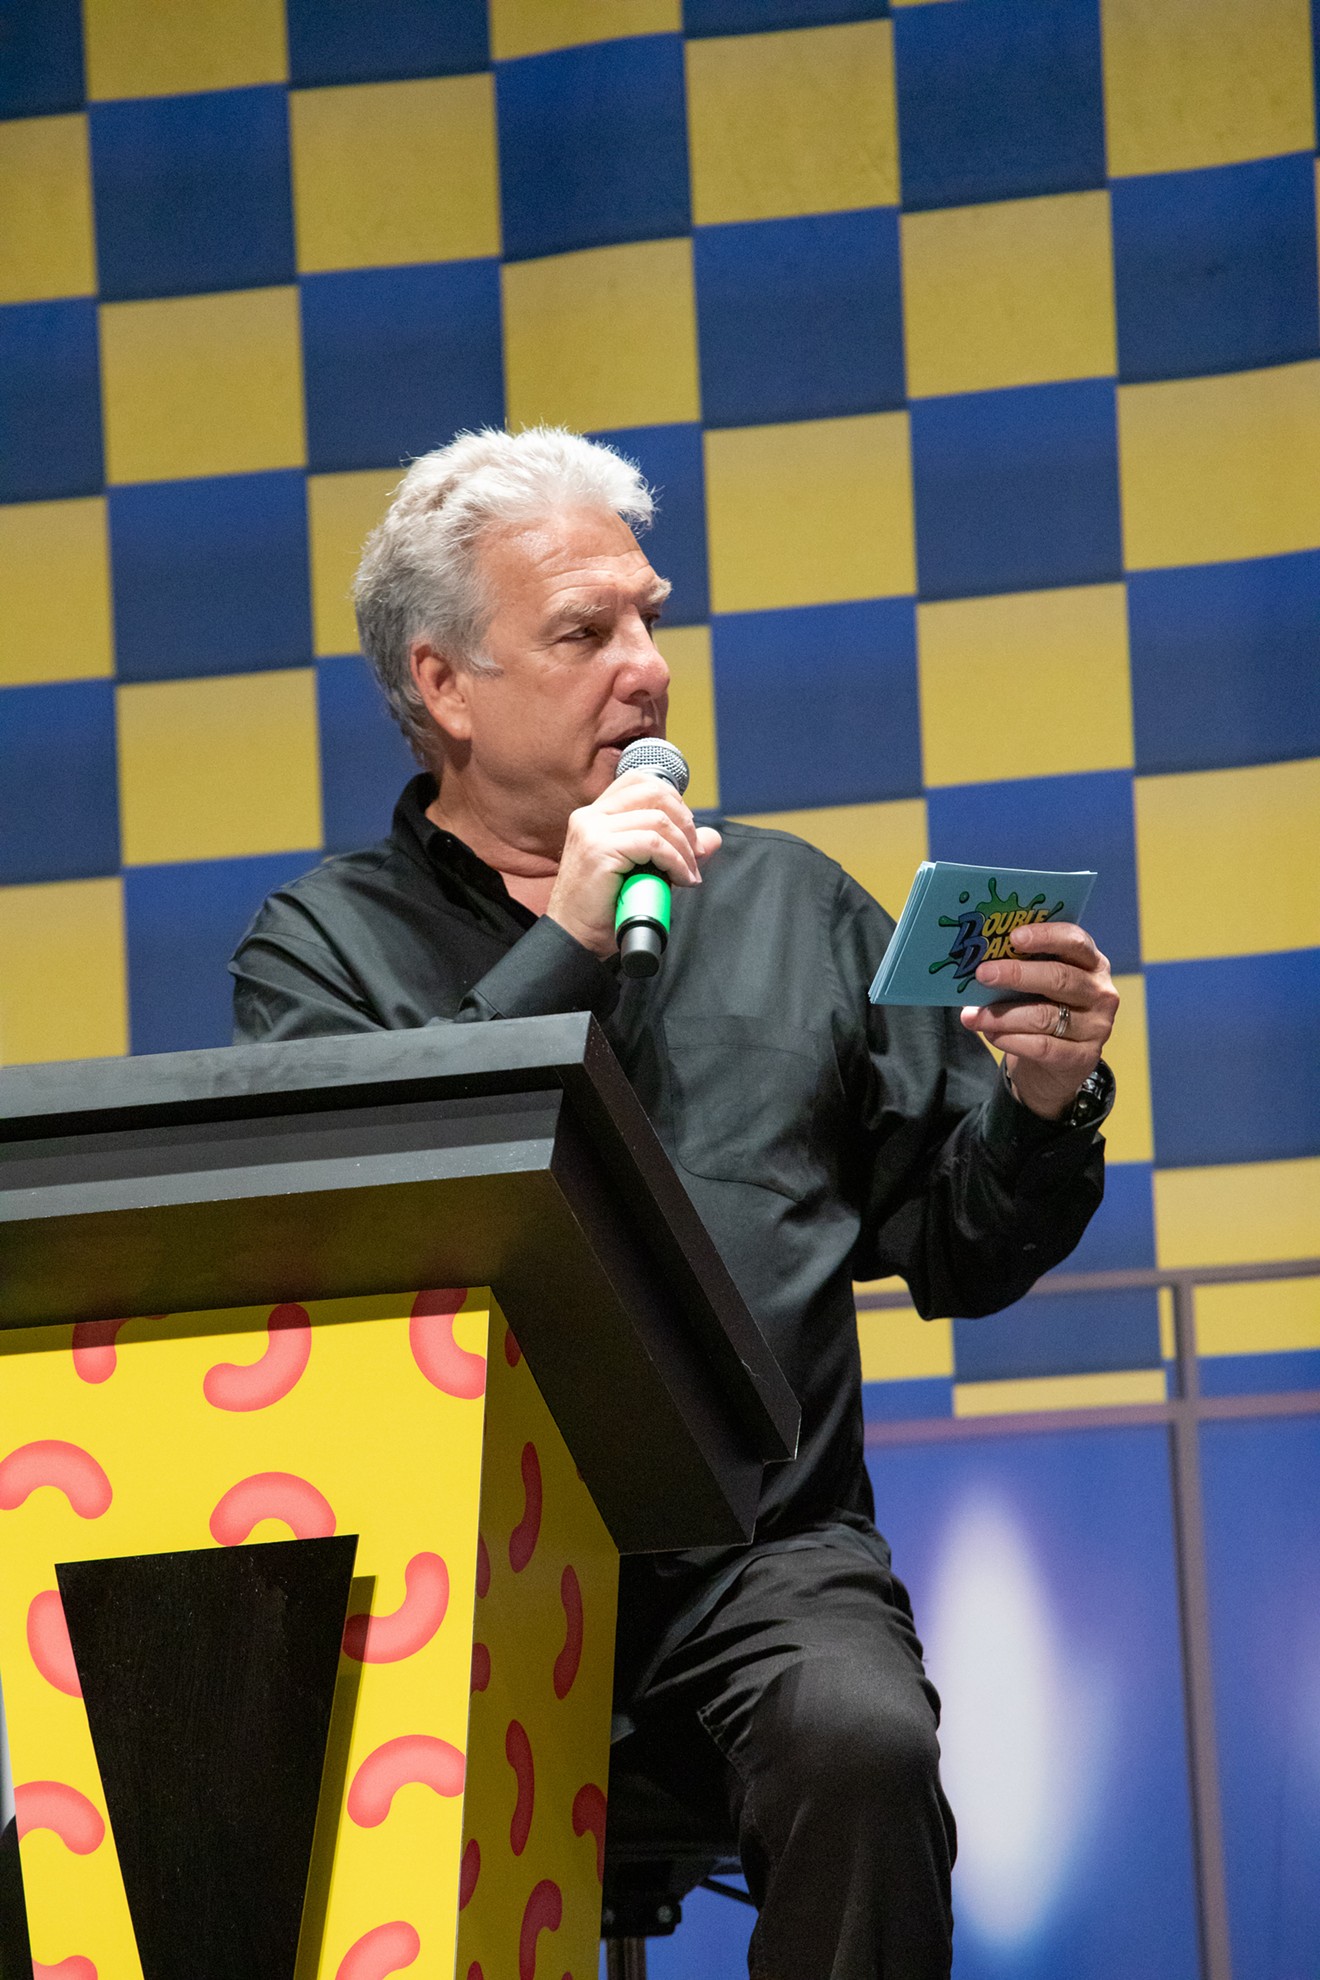 Double Dare host Marc Summers challenges a team of kids to answer a trivia question or take the physical challenge during a live stage show of the super sloppy Nickelodeon game show.